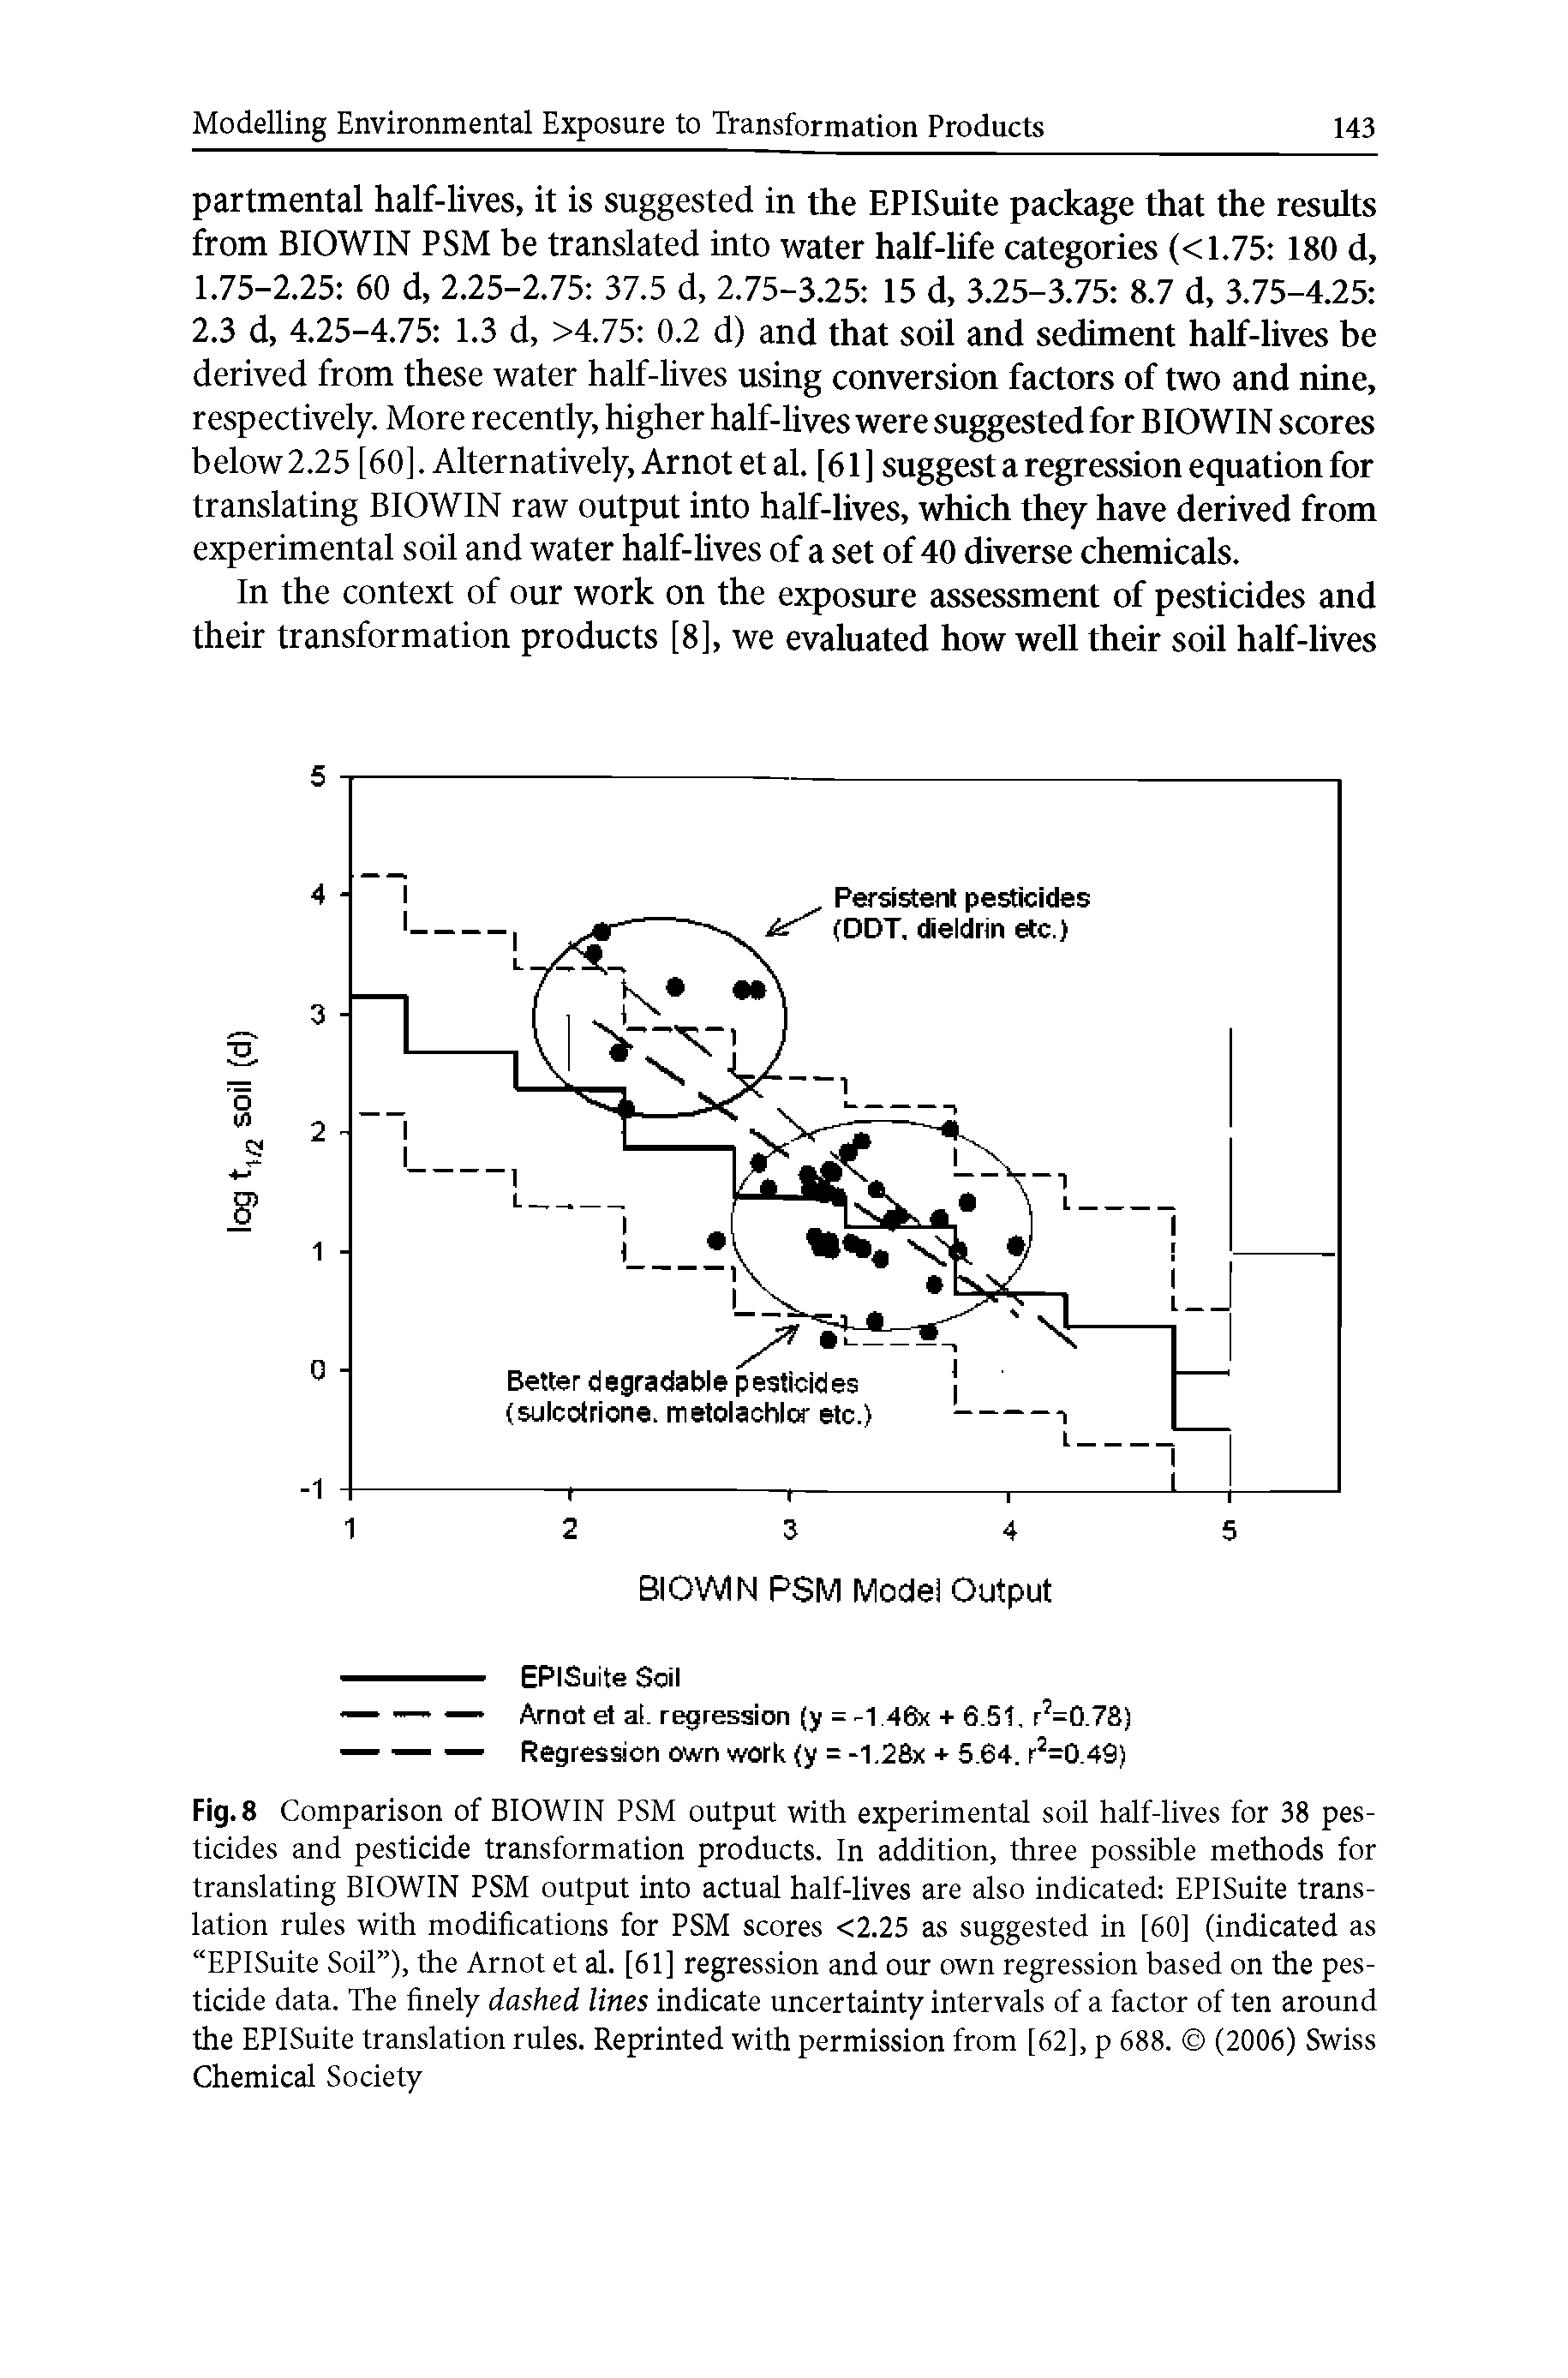 Fig. 8 Comparison of BIOWIN PSM output with experimental soil half-lives for 38 pesticides and pesticide transformation products. In addition, three possible methods for translating BIOWIN PSM output into actual half-lives are also indicated EPISuite translation rules with modifications for PSM scores <2.25 as suggested in [60] (indicated as EPISuite Soil ), the Arnot et al. [61] regression and our own regression based on the pesticide data. The finely dashed lines indicate uncertainty intervals of a factor of ten around the EPISuite translation rules. Reprinted with permission from [62], p 688. (2006) Swiss Chemical Society...